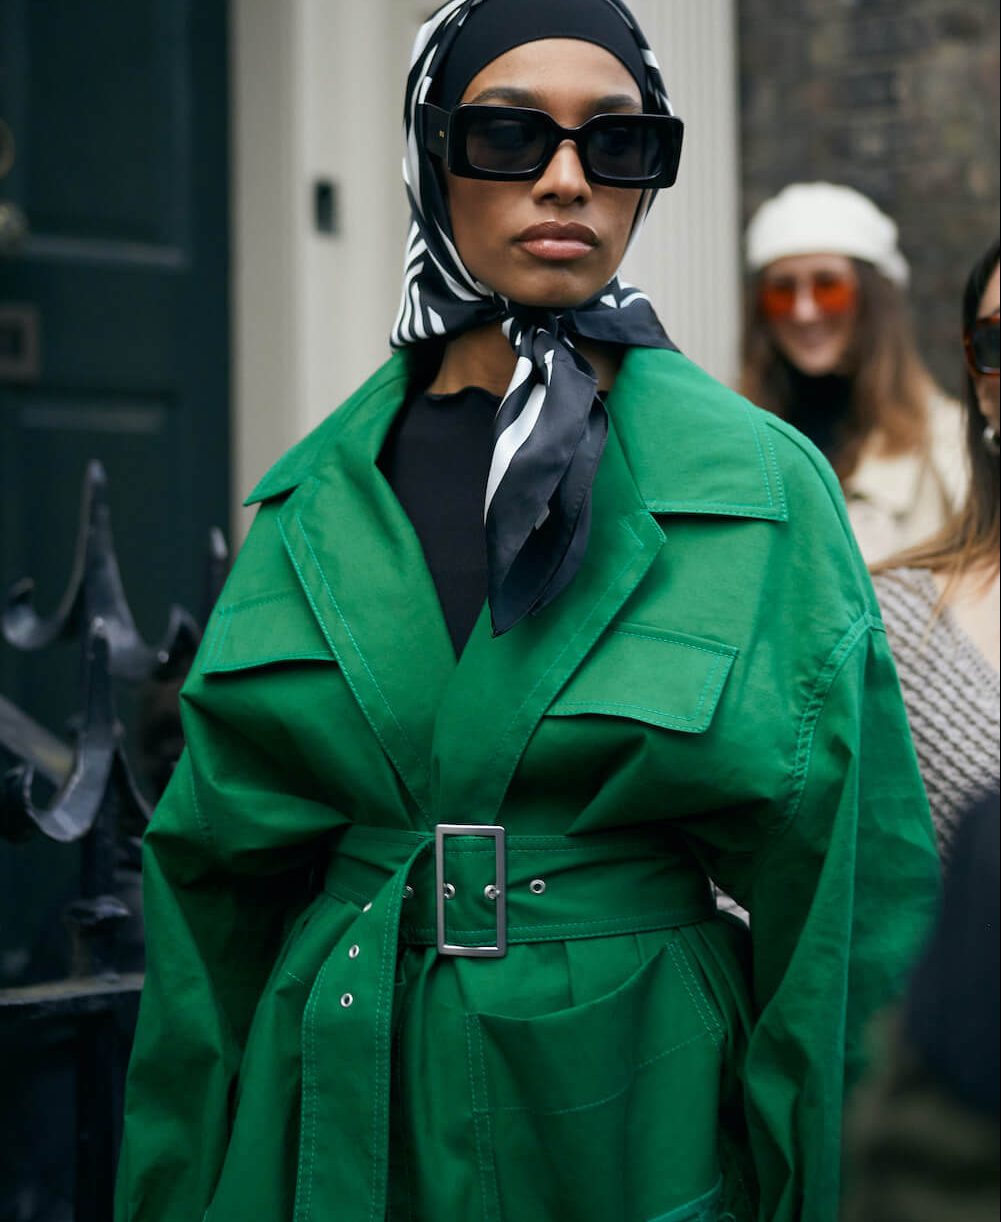 woman wears head scarf and green trench coat at london fashion week